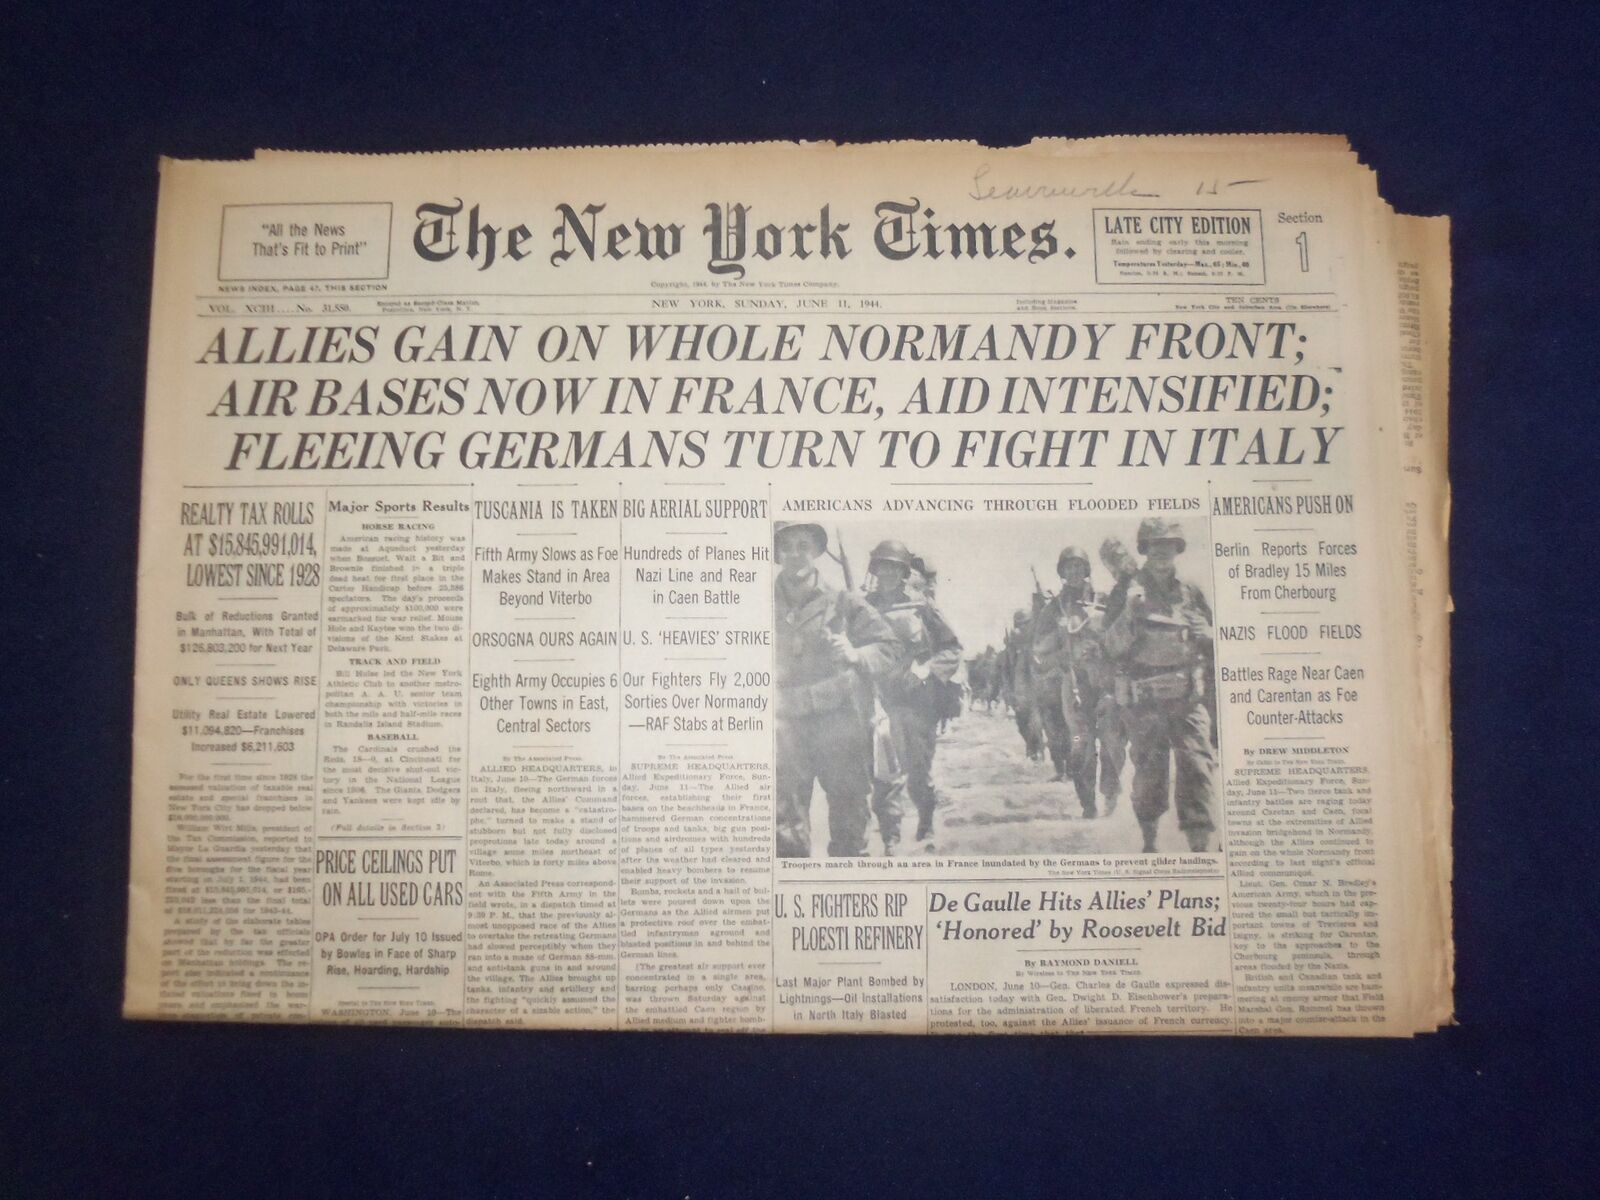 1944 JUNE 11 NEW YORK TIMES - ALLIES GAIN ON WHOLE NORMANDY FRONT - NP 6564